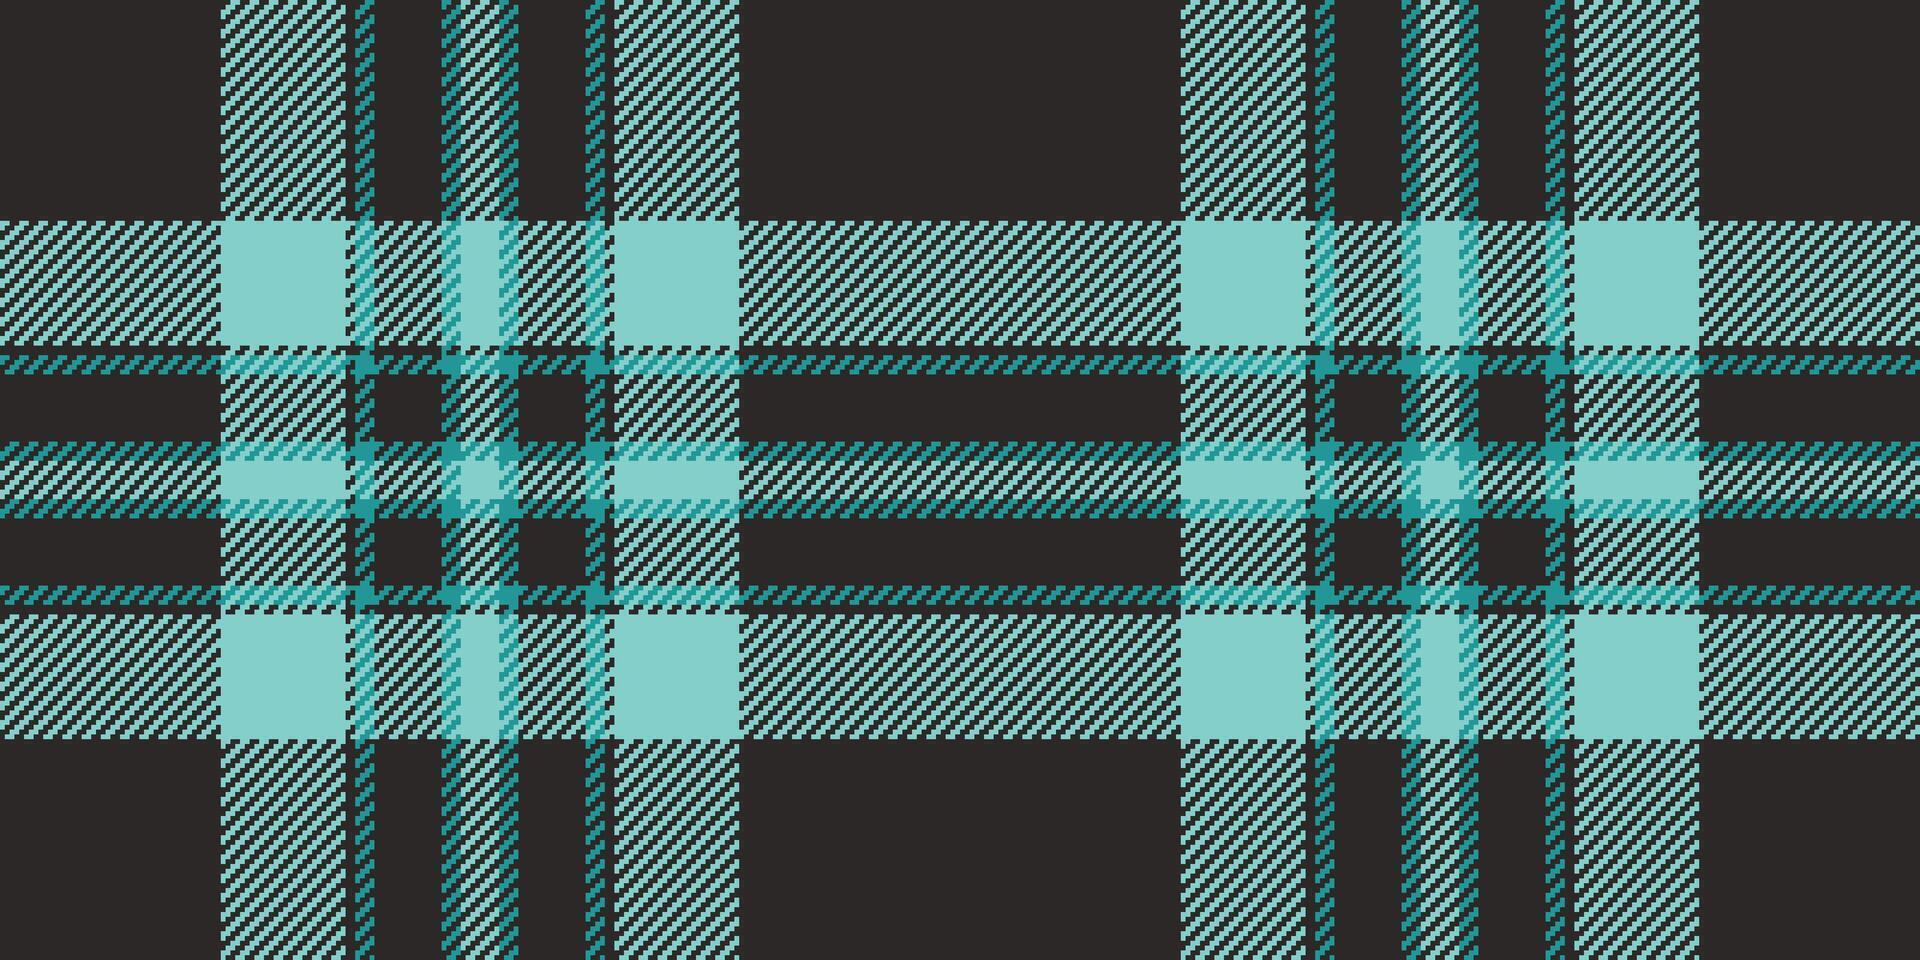 Grand seamless texture pattern, cultural plaid background check. Ethnic textile fabric tartan in teal and dark colors. vector